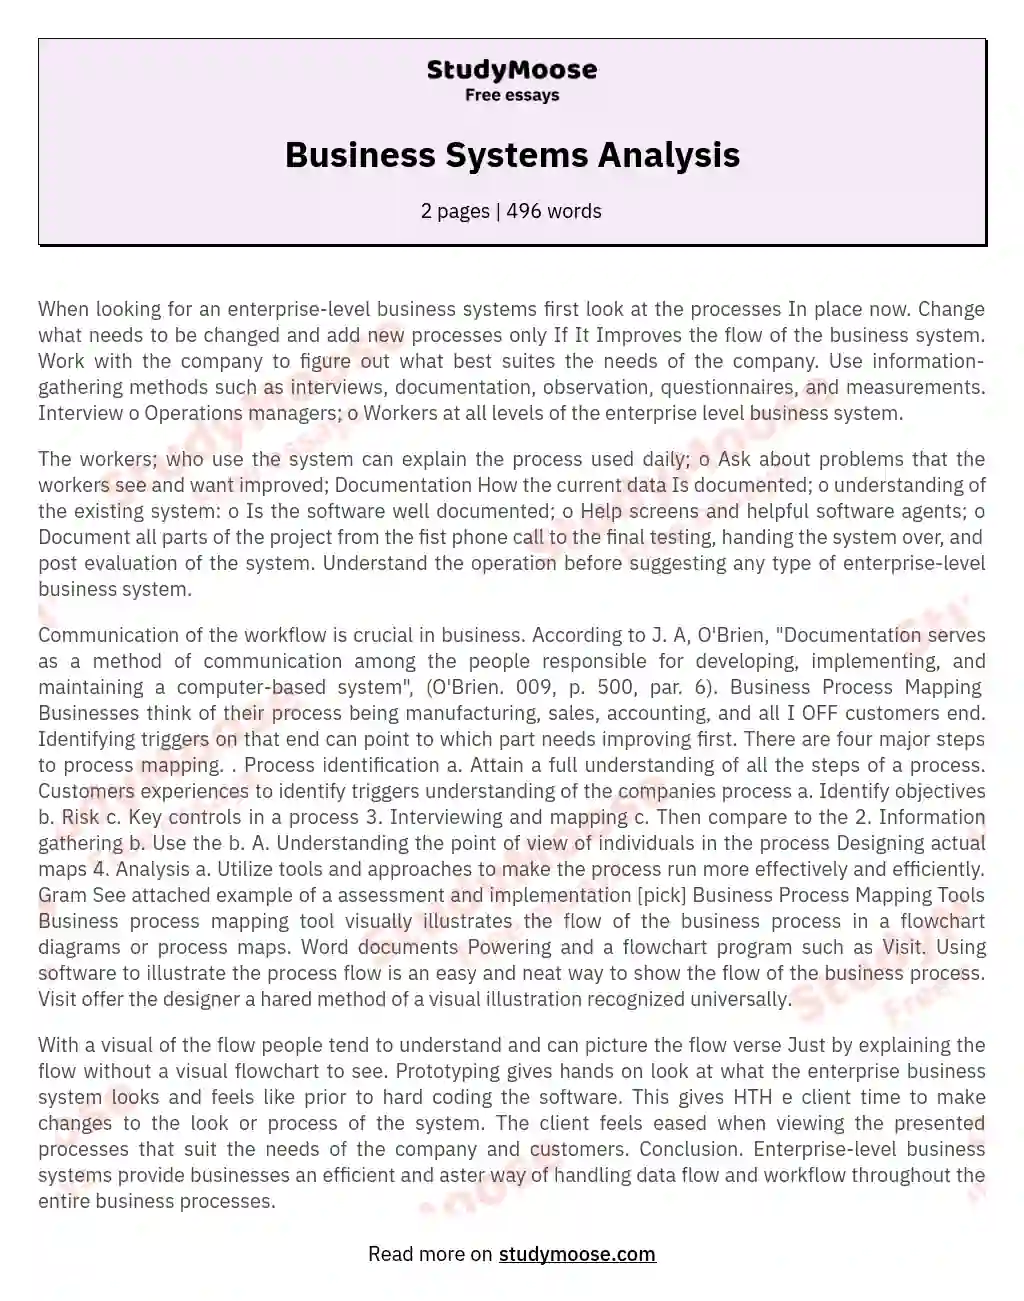 Business Systems Analysis essay